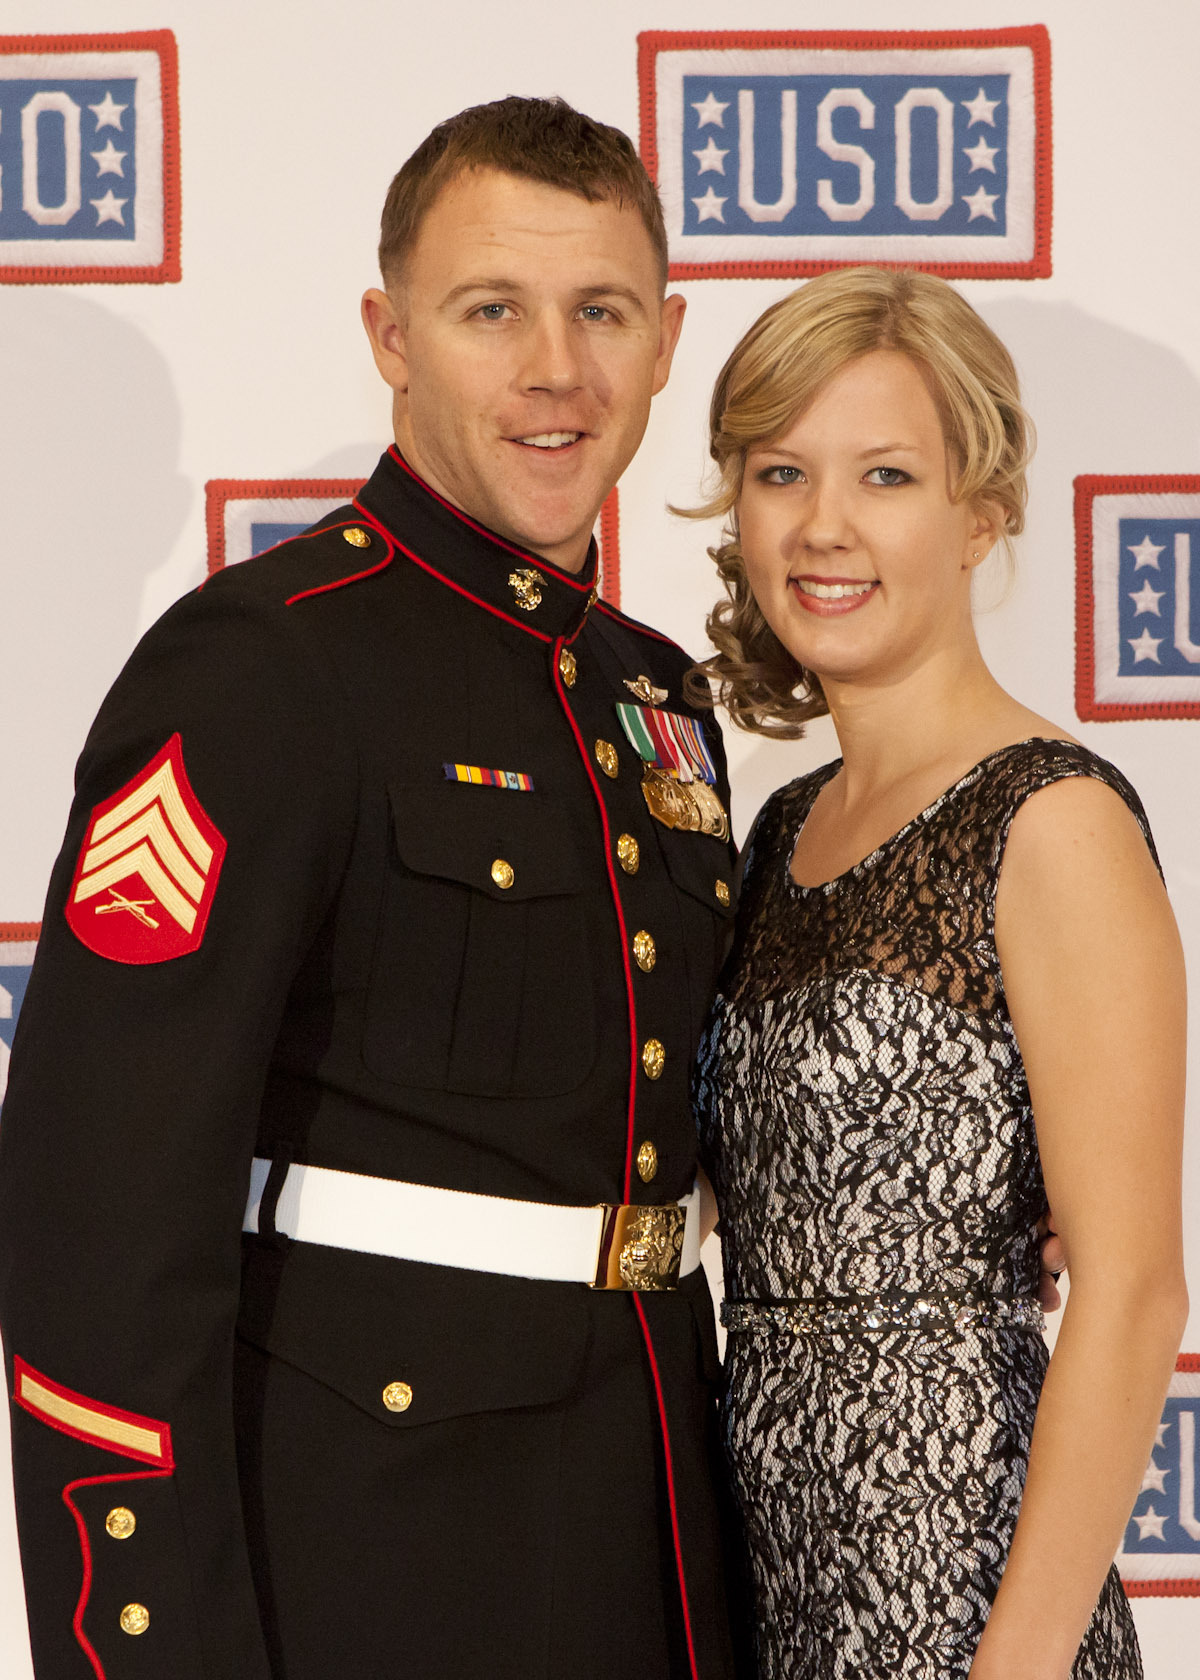 PHOTO: U.S. Marine Corps Sgt. Andrew C. Seif, left, poses for a photo with his wife, Dawn, during the reception before the 2013 USO Gala in Washington, Oct. 25, 2013. 